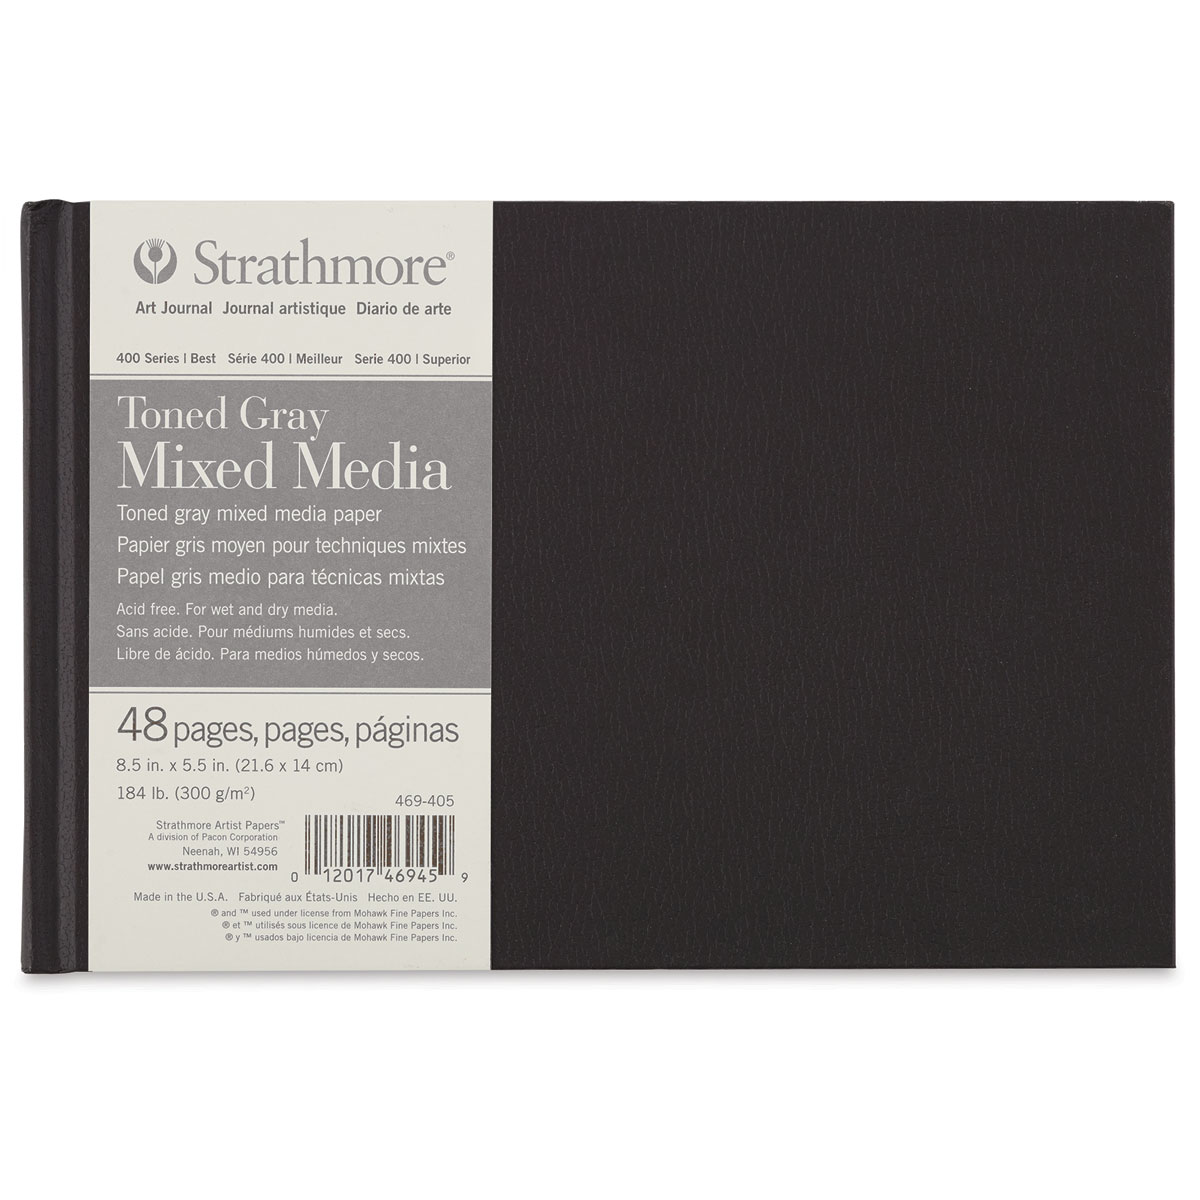 Strathmore 400 Series Hardbound Toned Mixed Media Artist Journal - Gray,  5-1/2 x 8-1/2, 48 pages